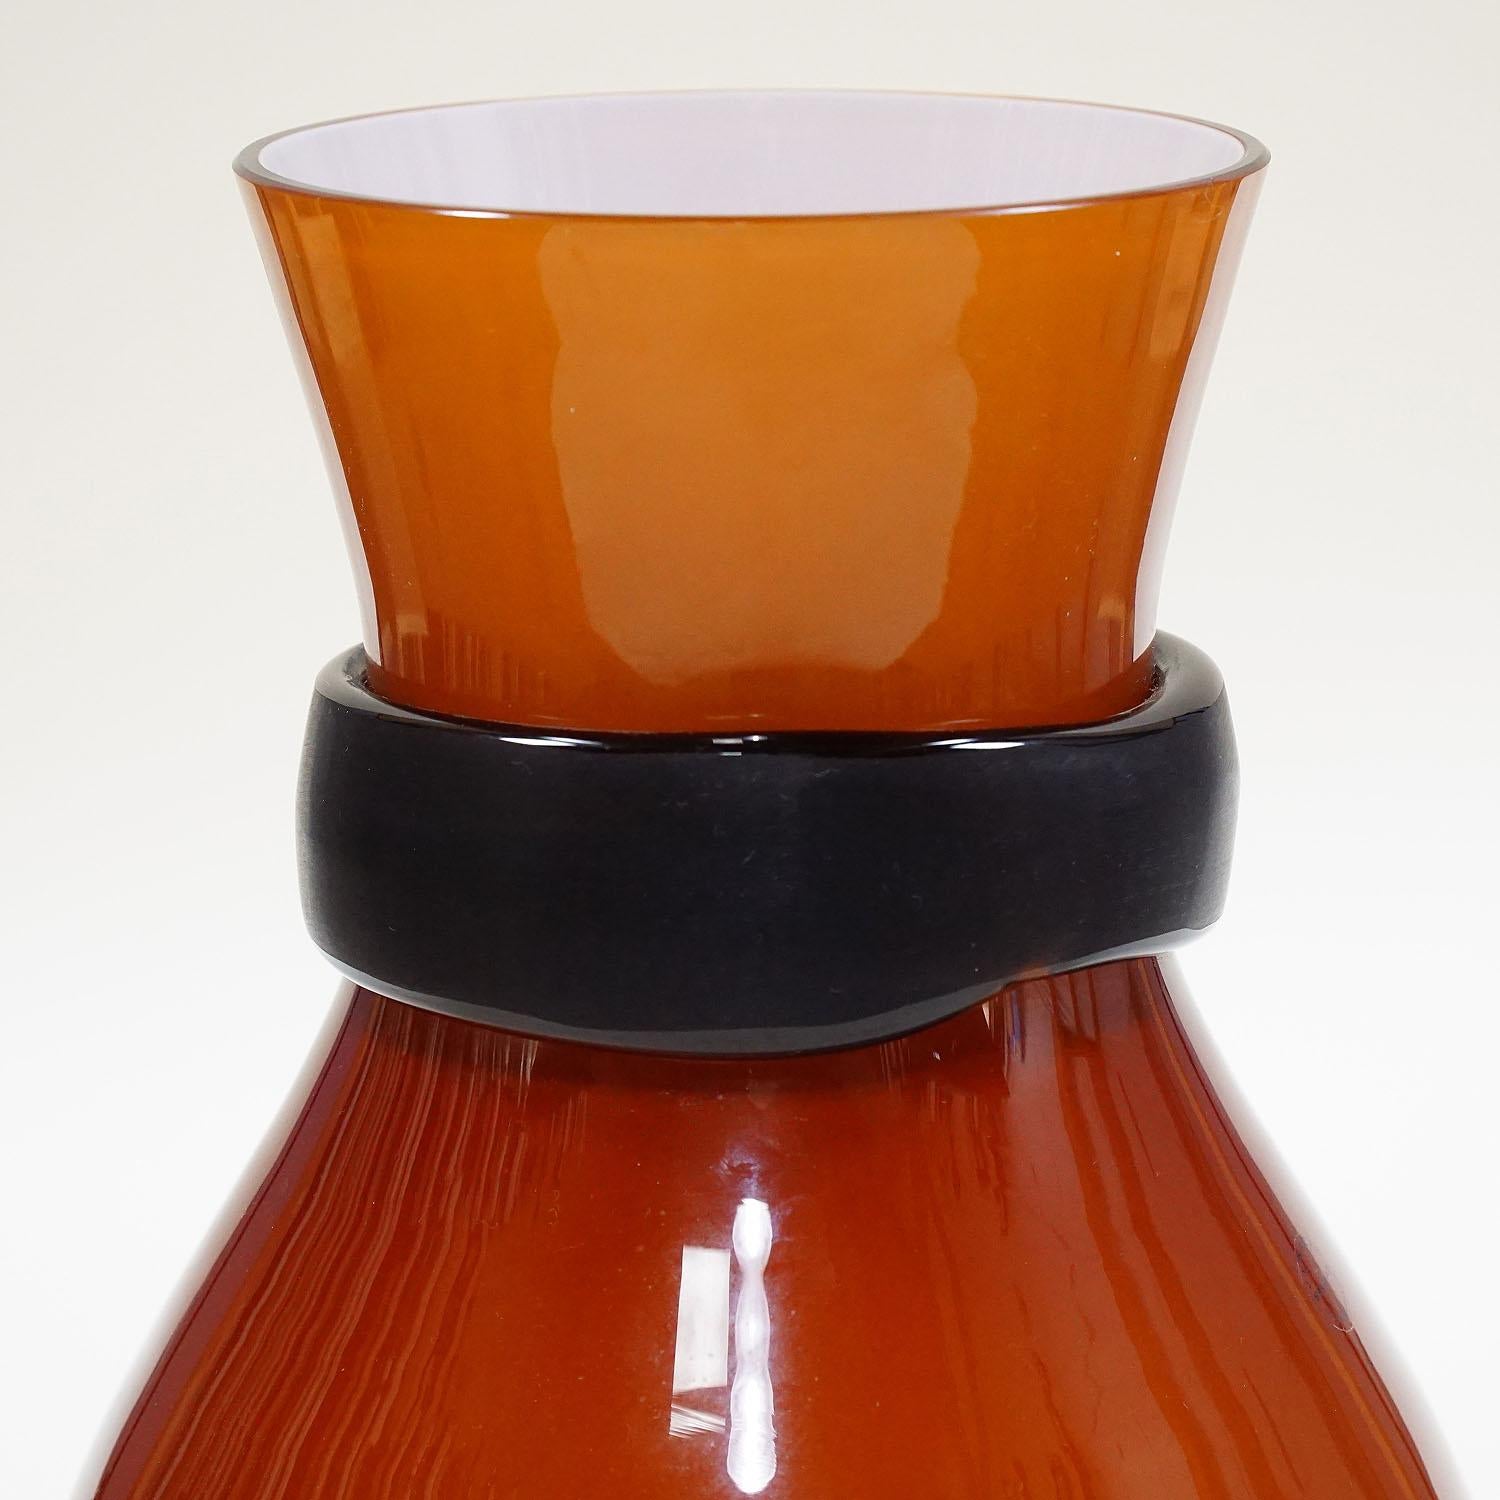 A large art glass vase designed by Simon Moore and manufactured by Salviati, Venice in 2004. Opaque white and brown glass with clear glass surface, grinded black glass collar at the throat. Acid etched 'salviati 2004' on the base and company